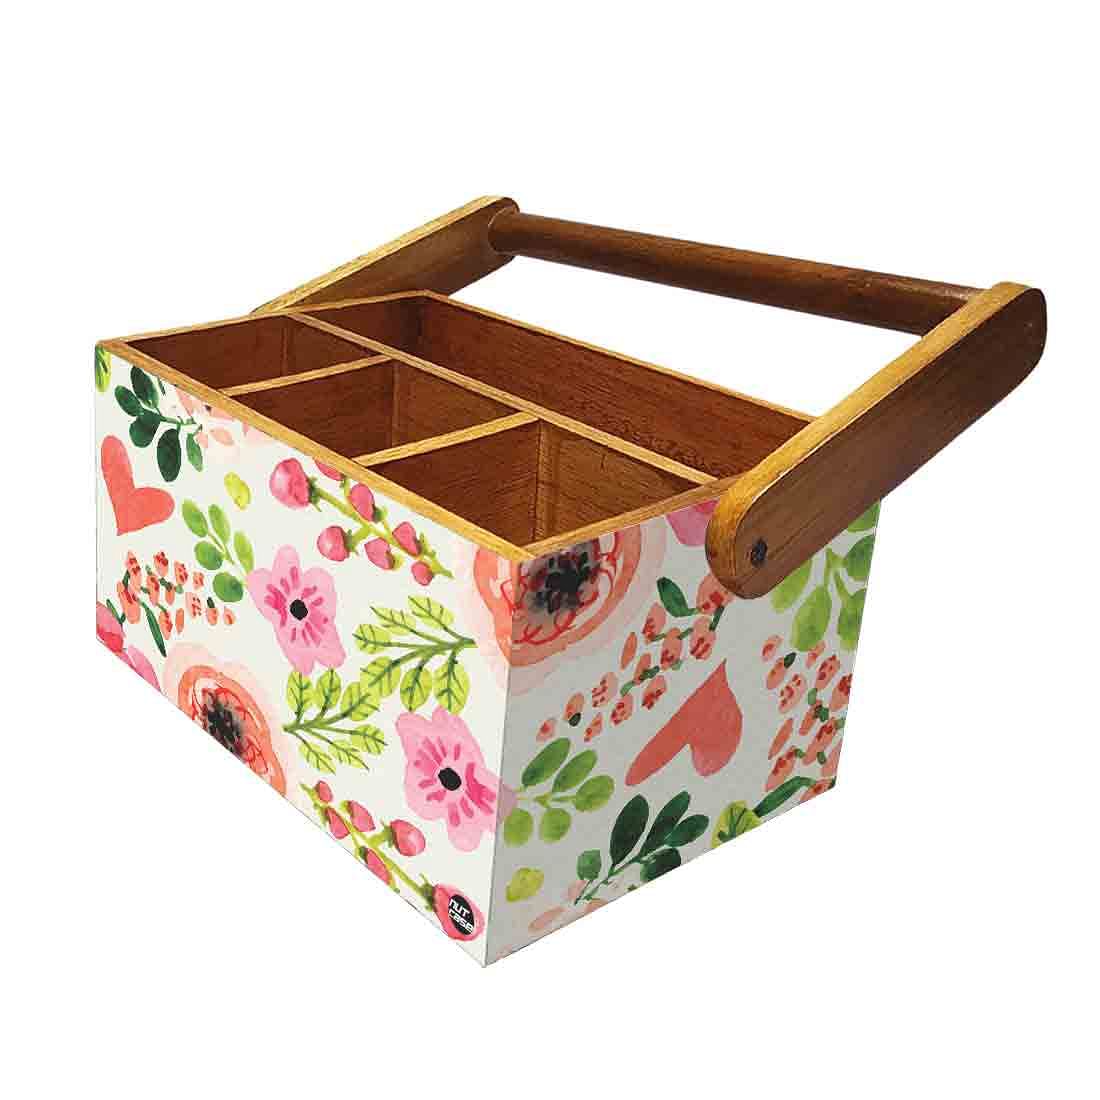 Classy Wooden Cutlery Holder for Dinning Table Organizer - Baby Flowers Nutcase